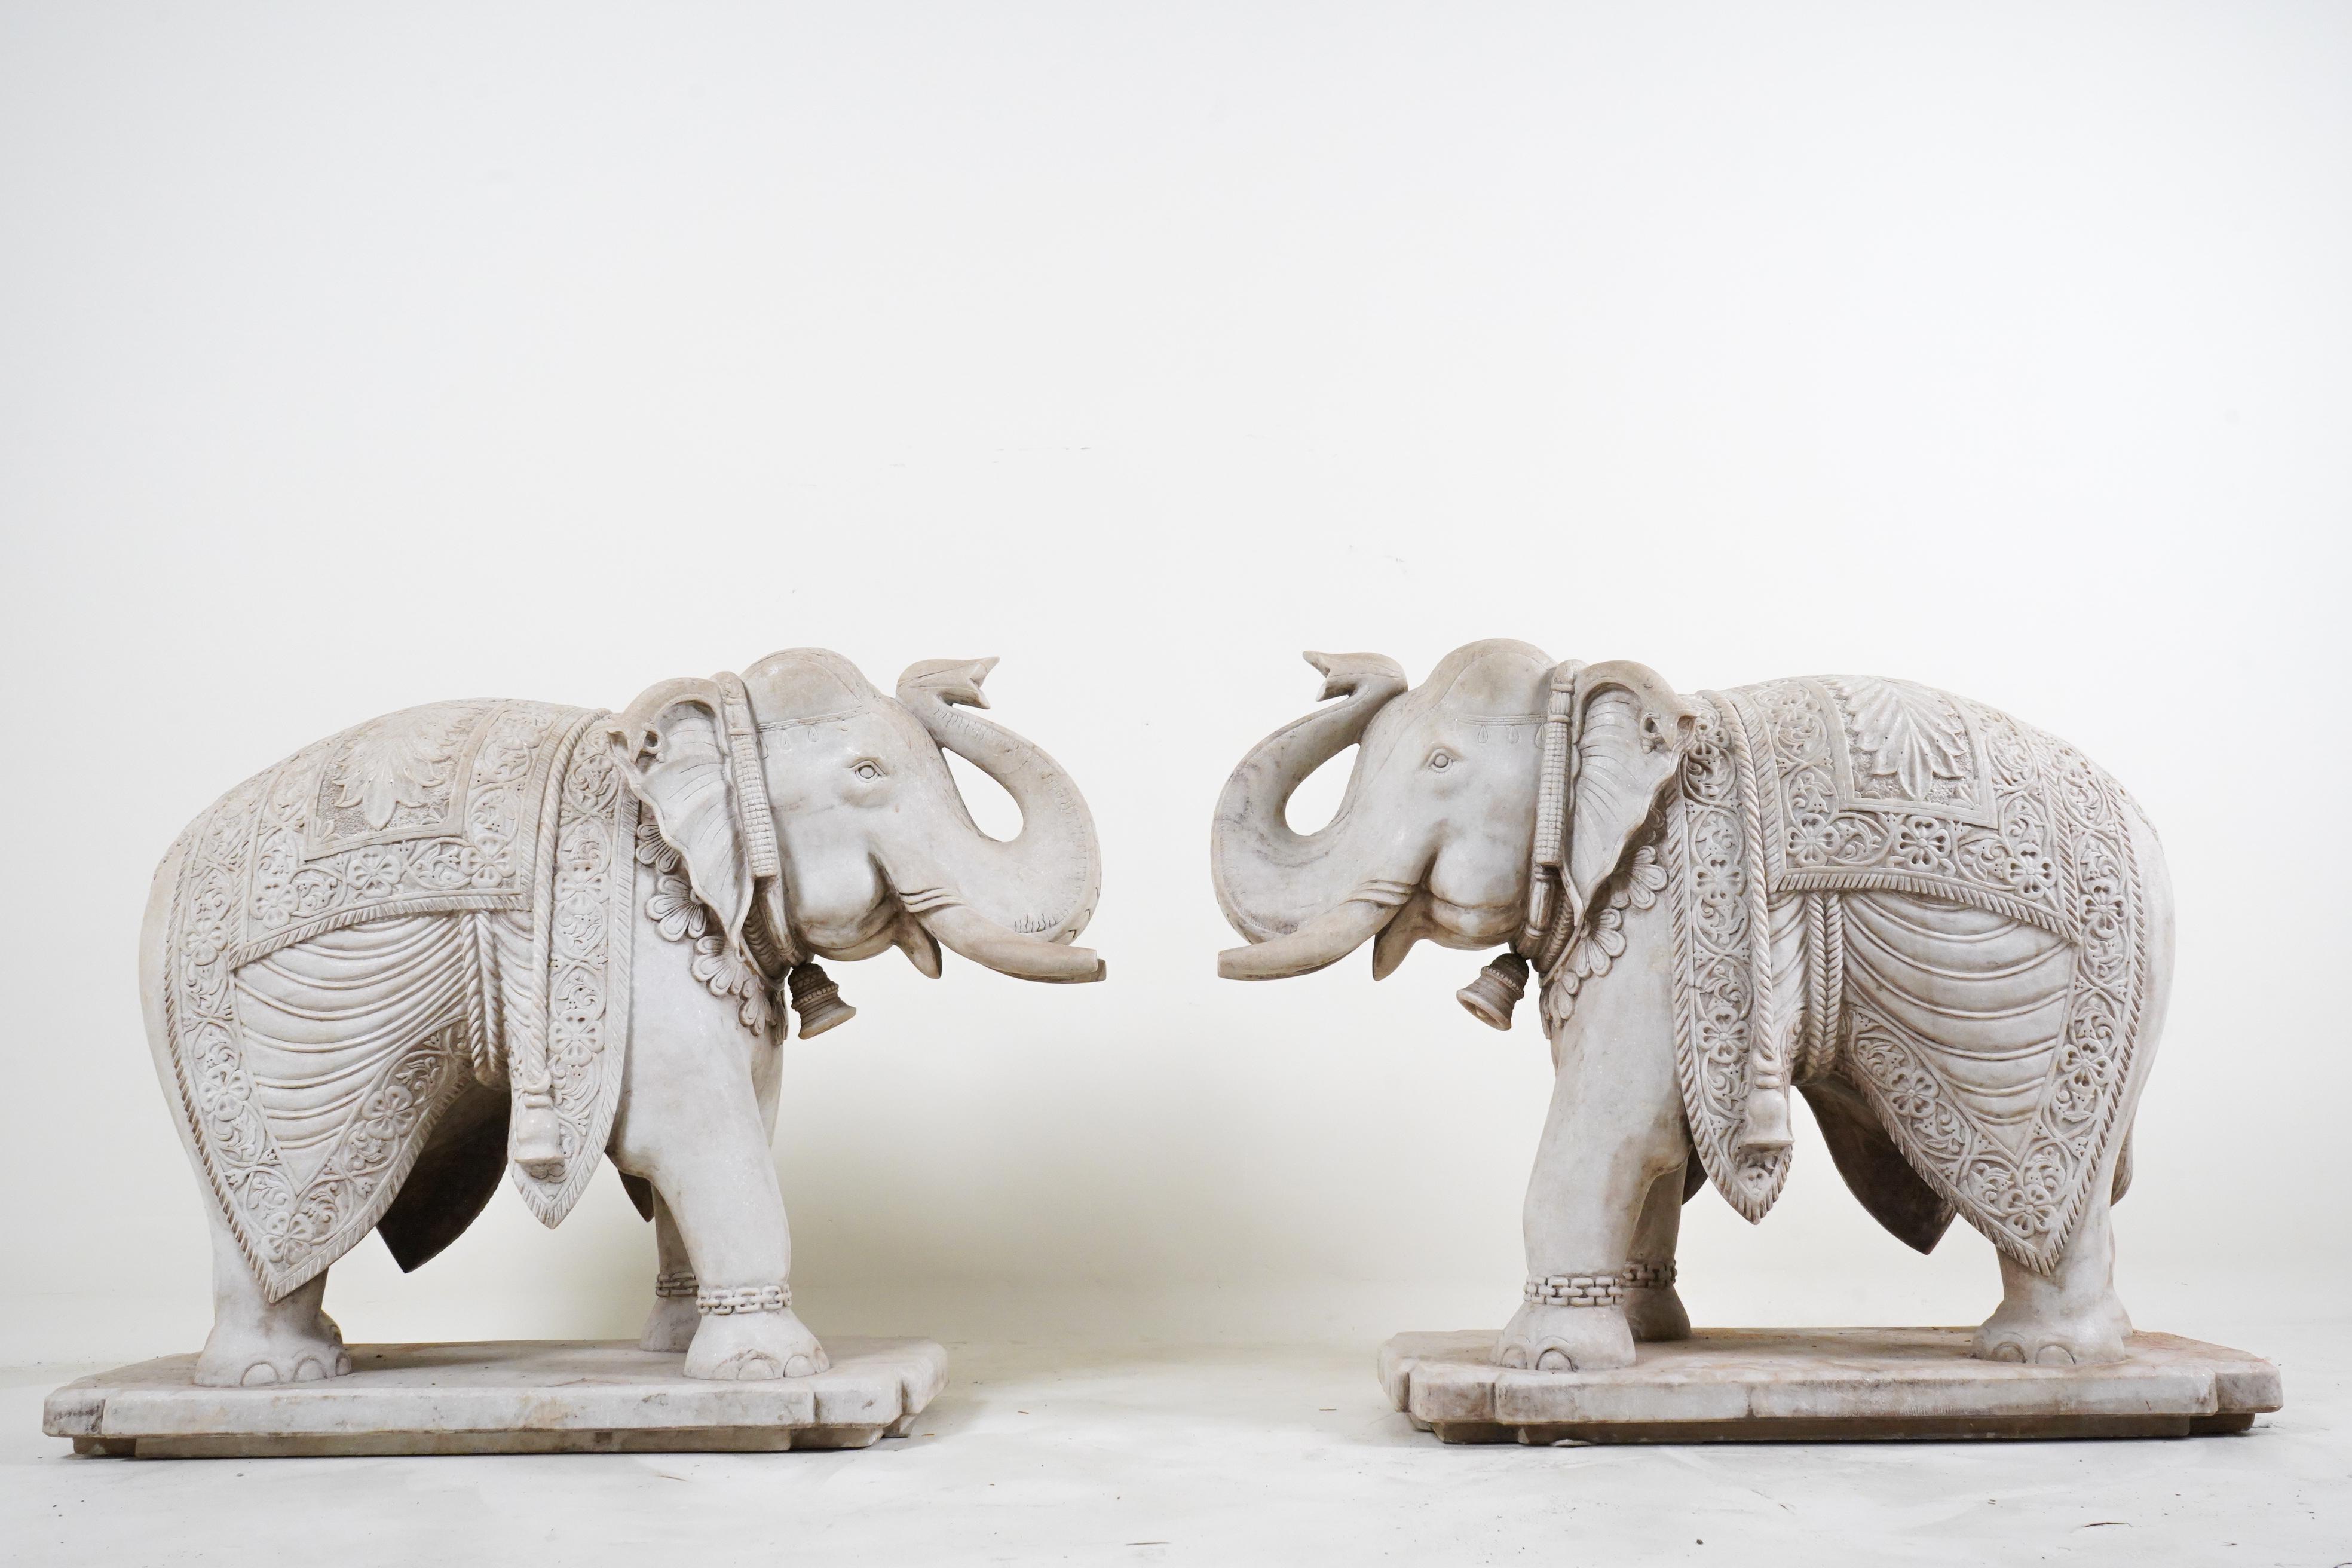 This is an exquisitely carved pair of  Indian marble elephants. Standing foursquare,  these magnificent creatures embody elegance and power. Sculpted from fine white marble, their intricate details and lifelike features captivate the beholder's